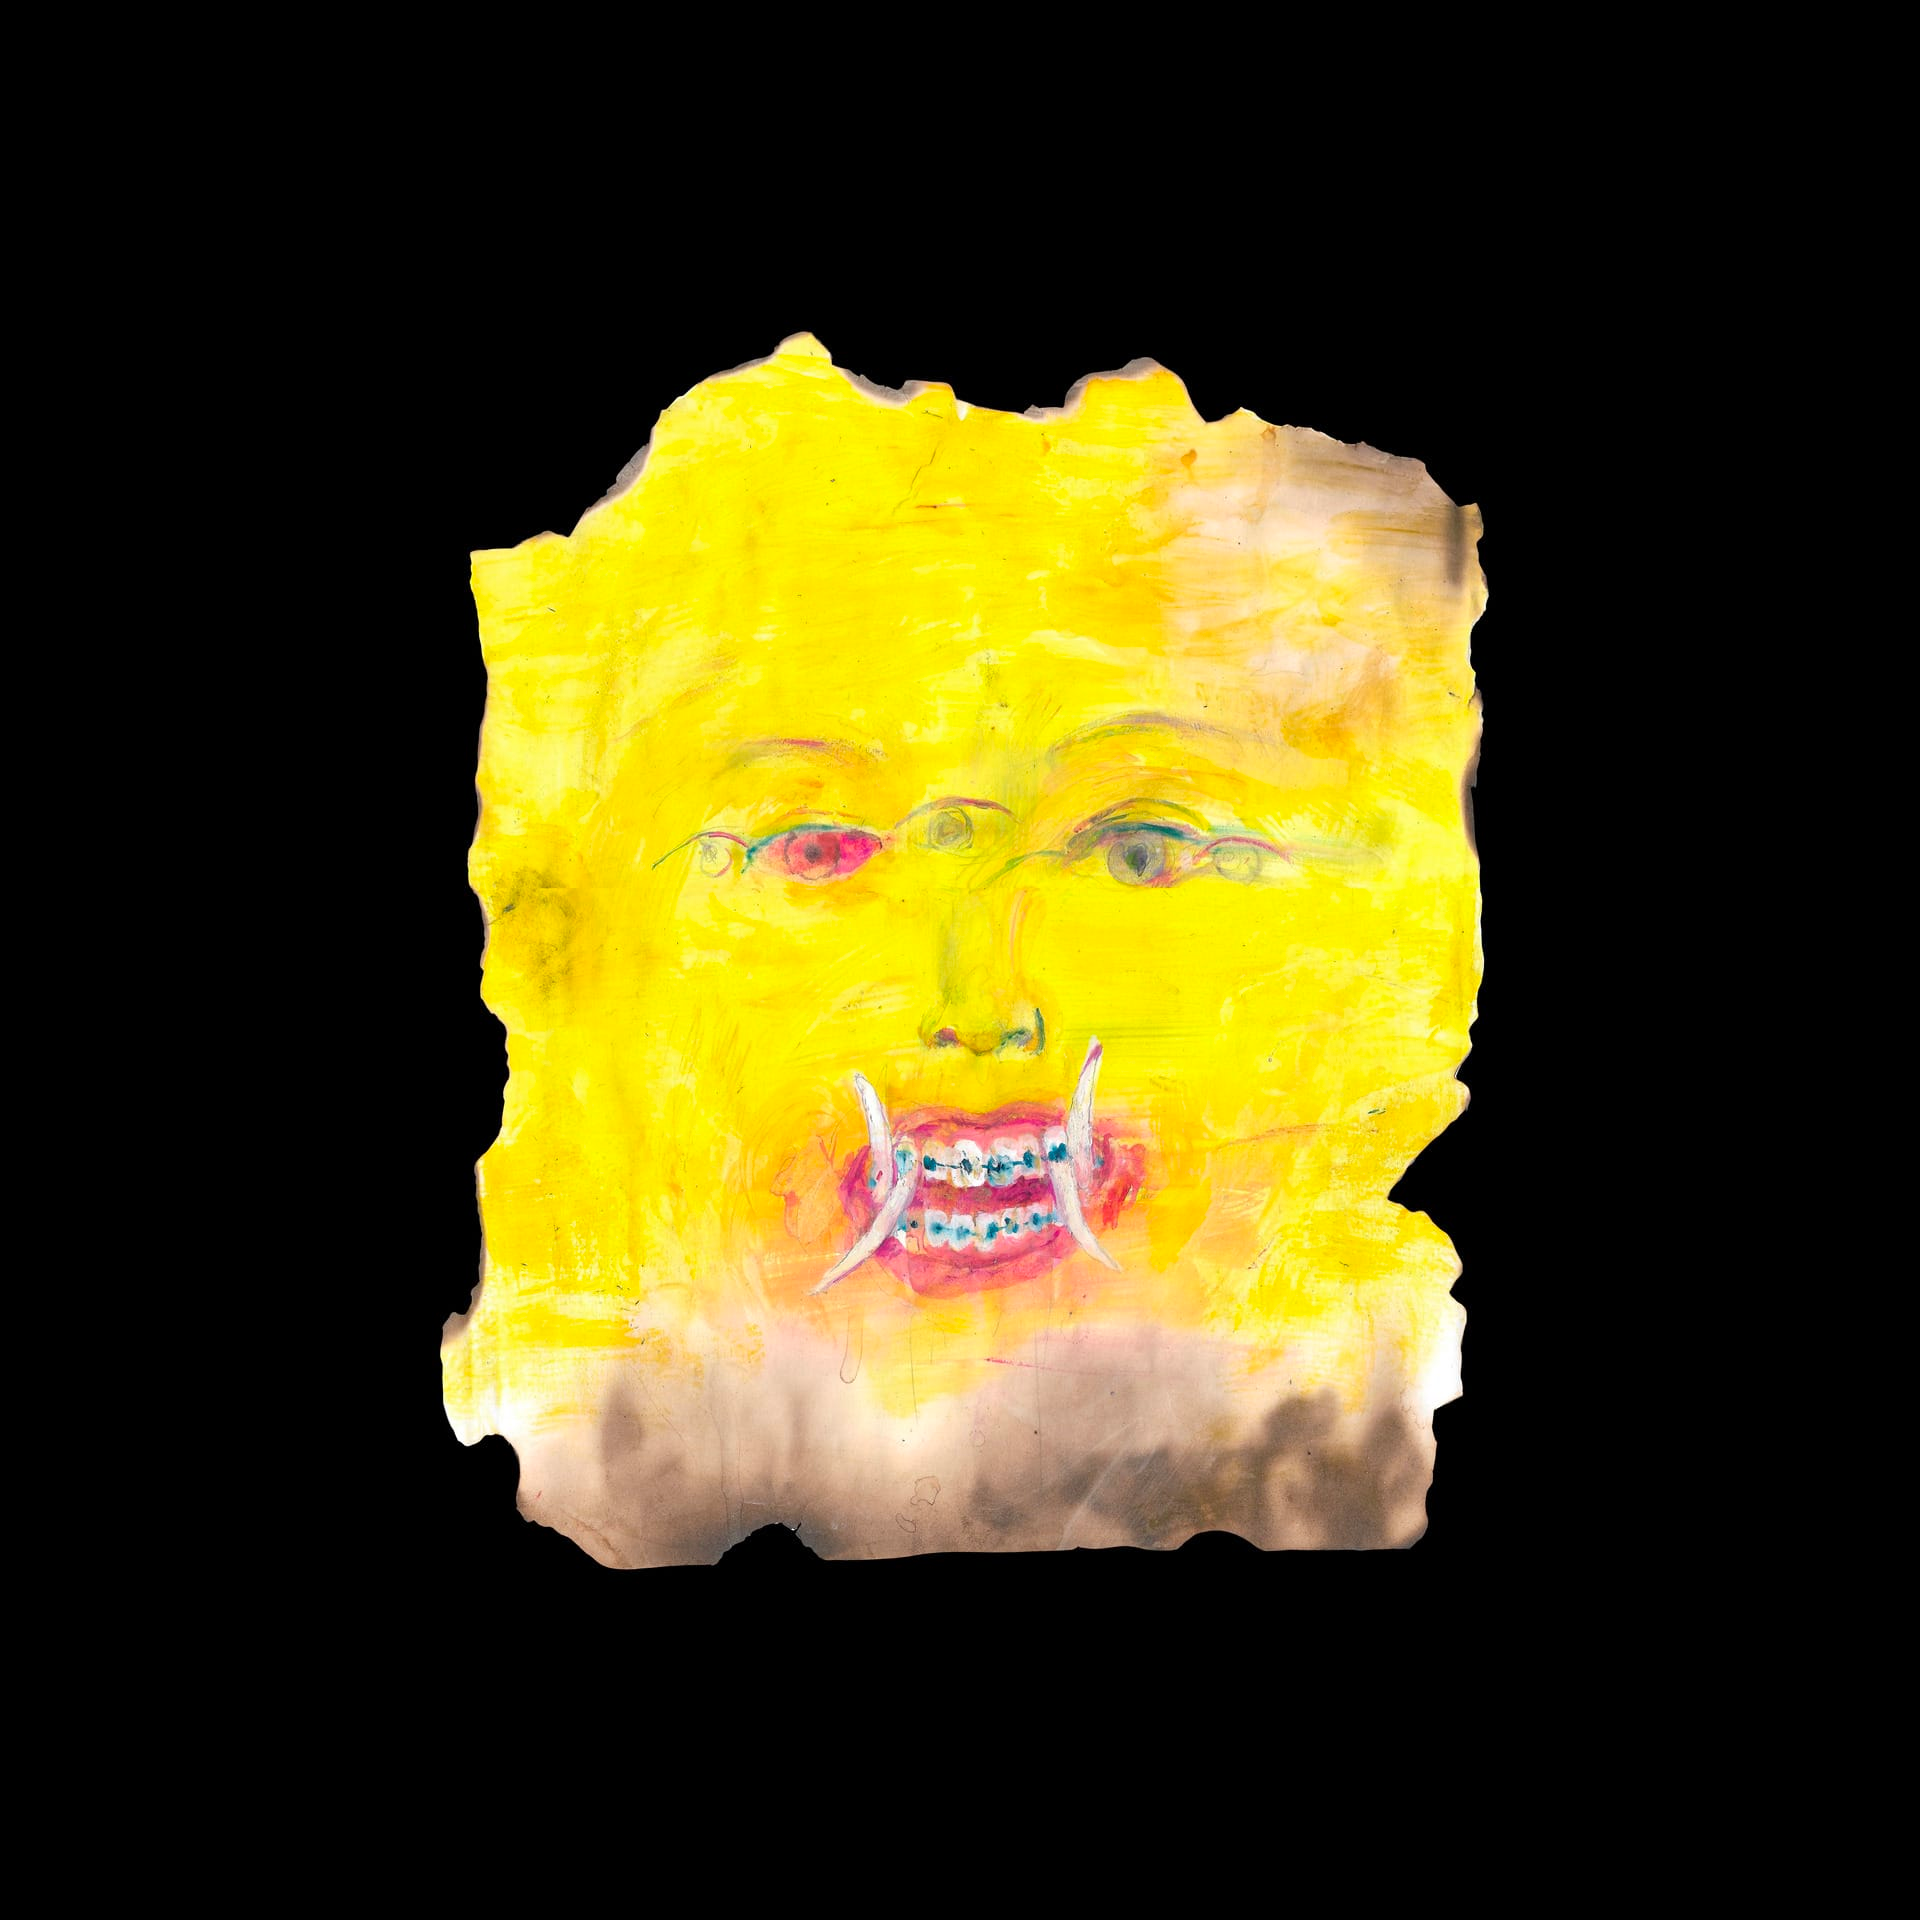 Image of an abstract yellow face, with a ragged border and open mouth with braces on upper and lower teeth, floats in the middle of a black background.